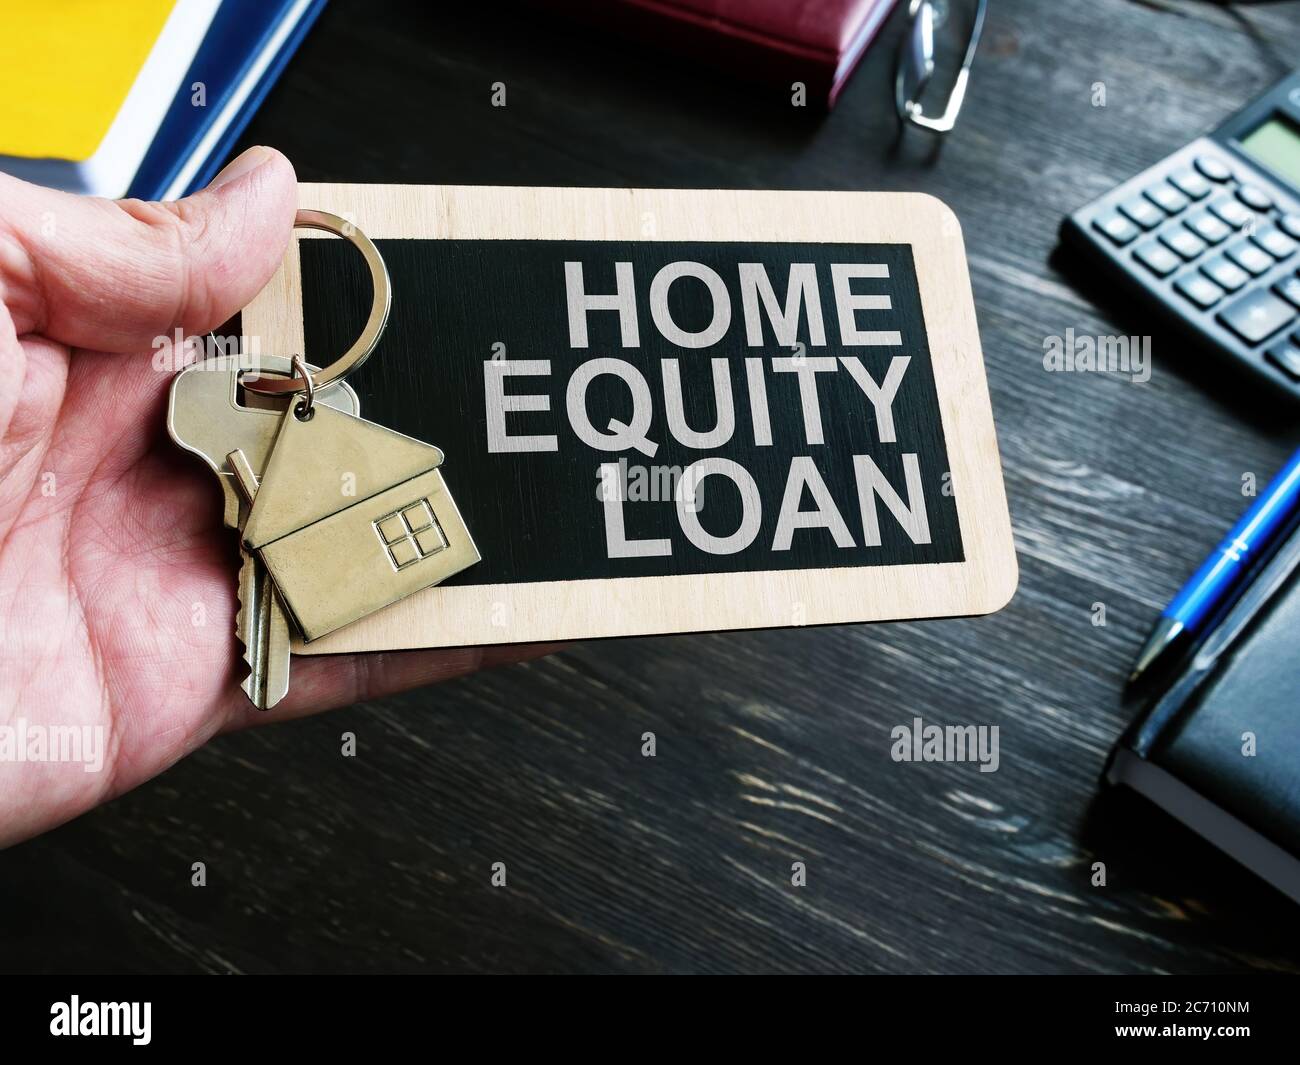 Home Equity Loan sign and key for house. Stock Photo